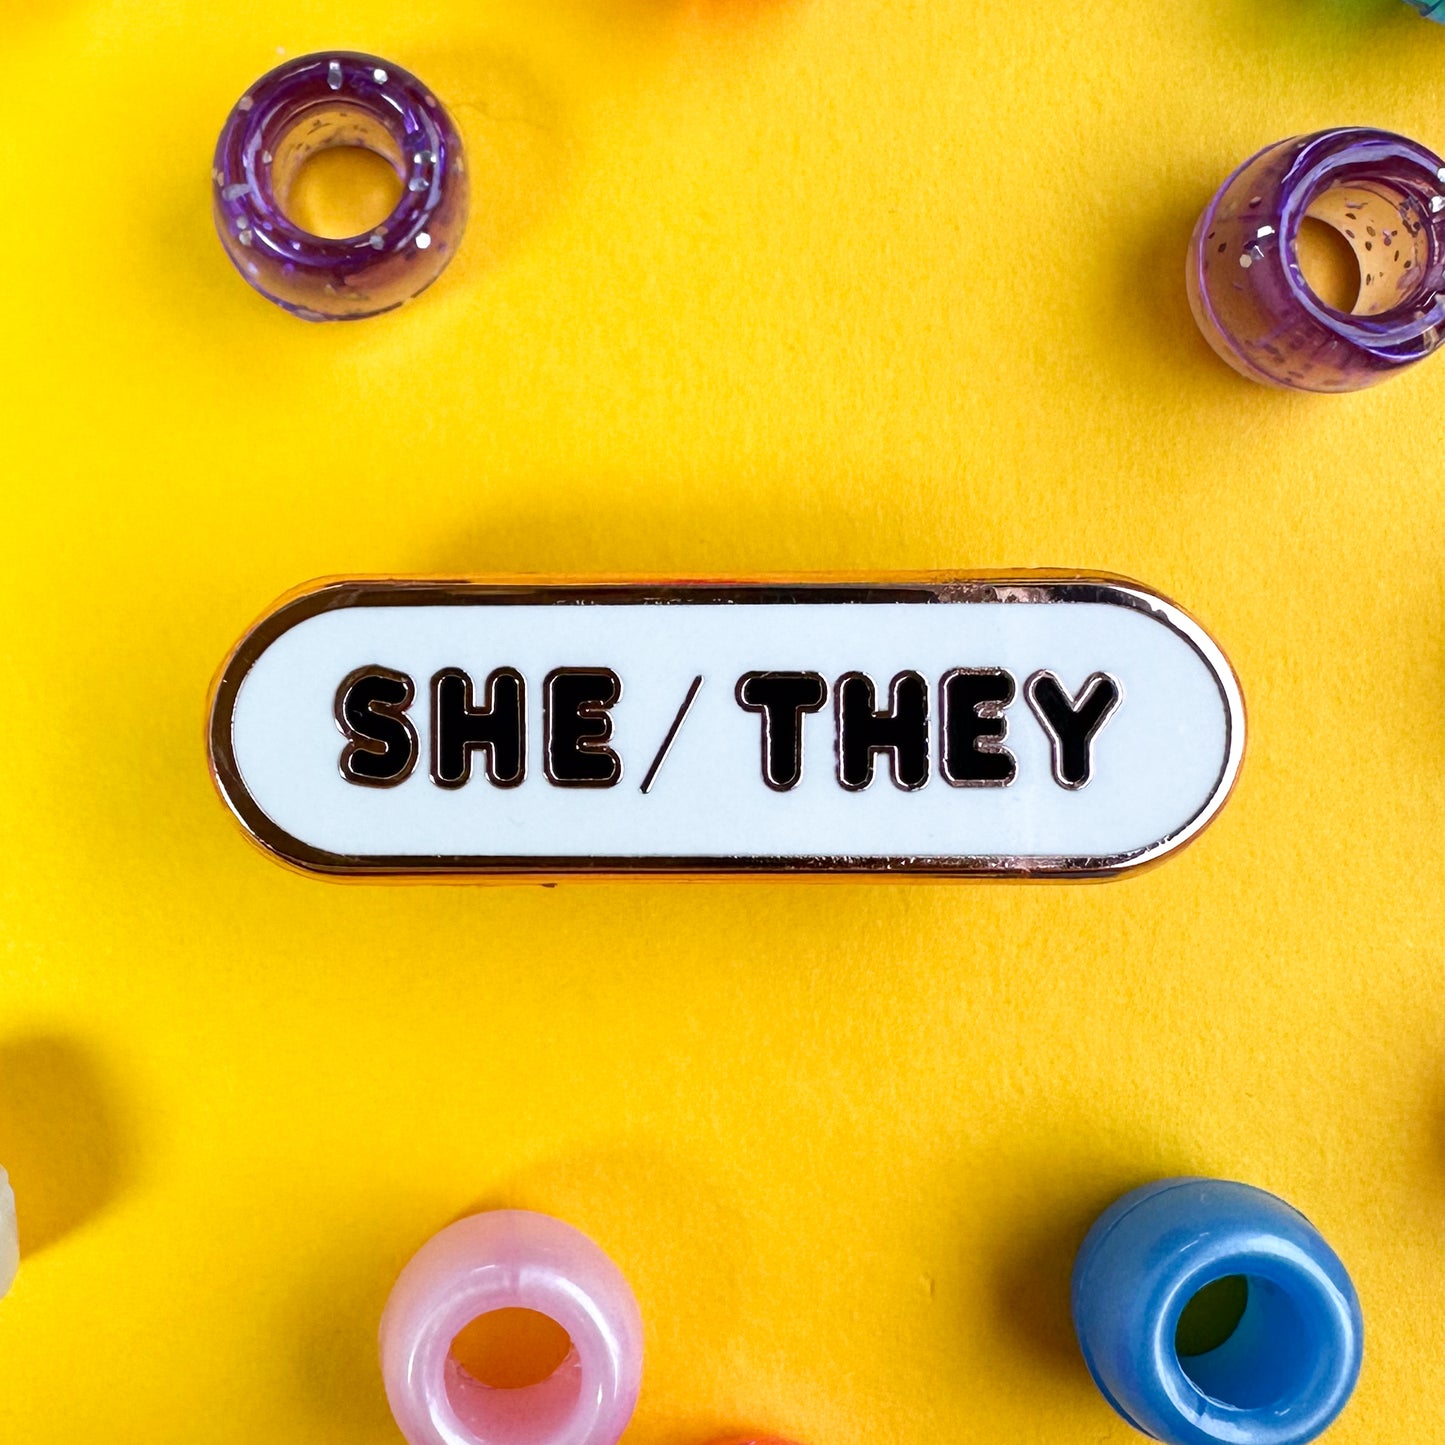 An oval shaped pin with the pronouns "She/They" on it in black letters. The pin is on a yellow background with purple, blue, and pink pony beads around it.